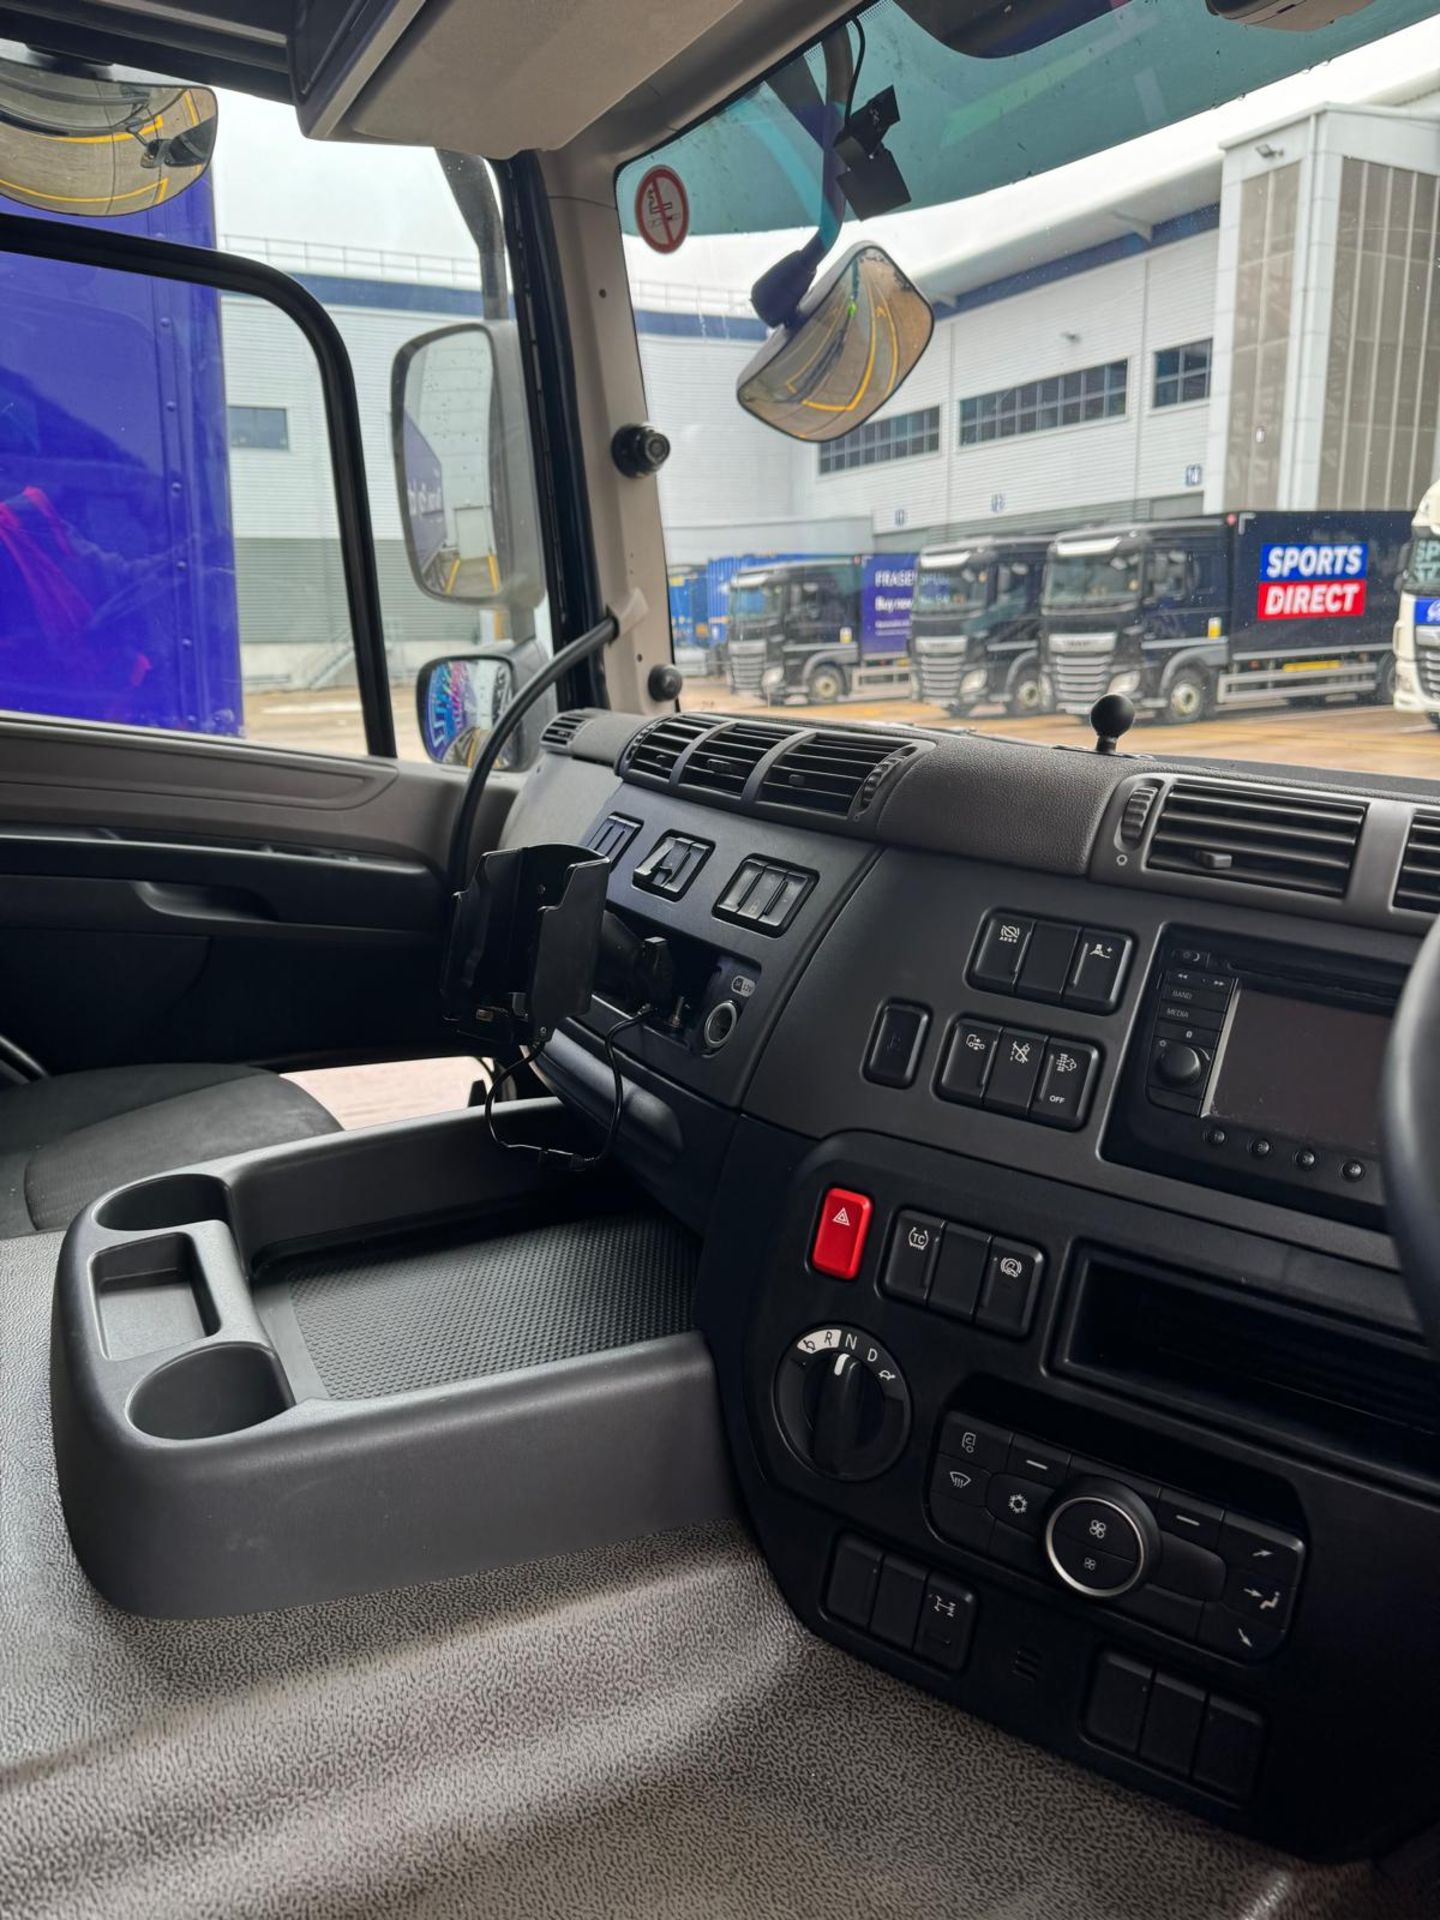 2019, DAF CF 260 FA (Ex-Fleet Owned & Maintained) - FN69 AXH (18 Ton Rigid Truck with Tail Lift) - Image 11 of 22